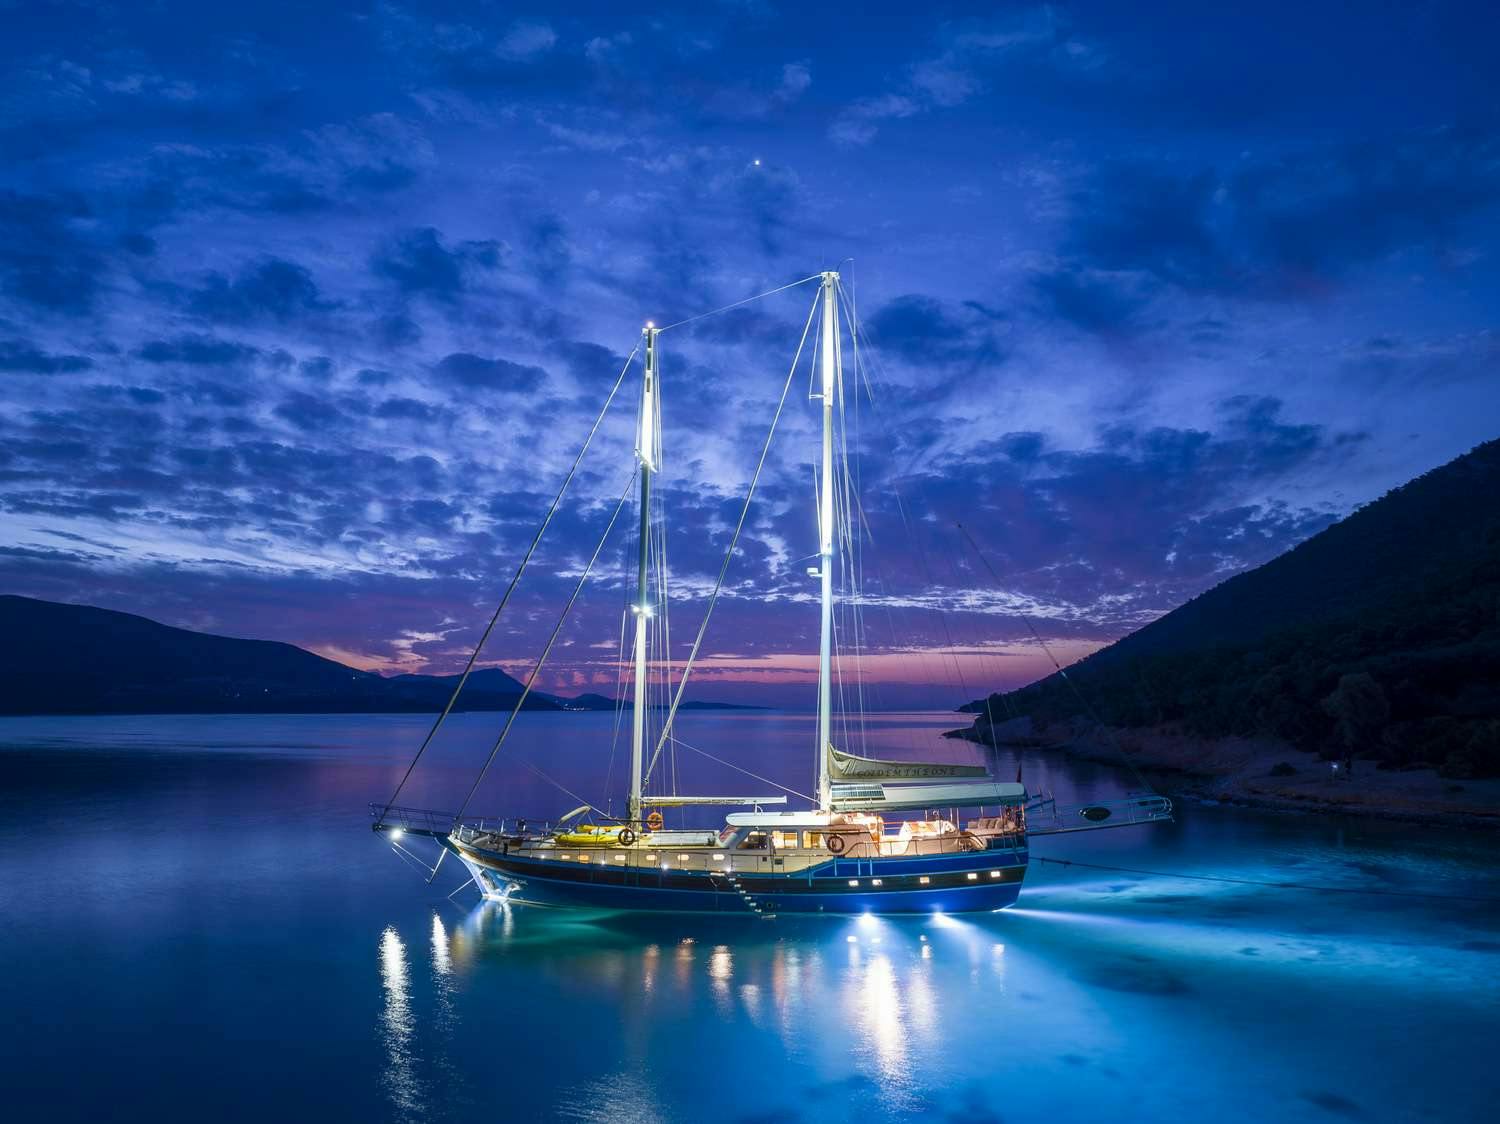 GOZDEM THE ONE - Yacht Charter Marmaris & Boat hire in Turkey 1